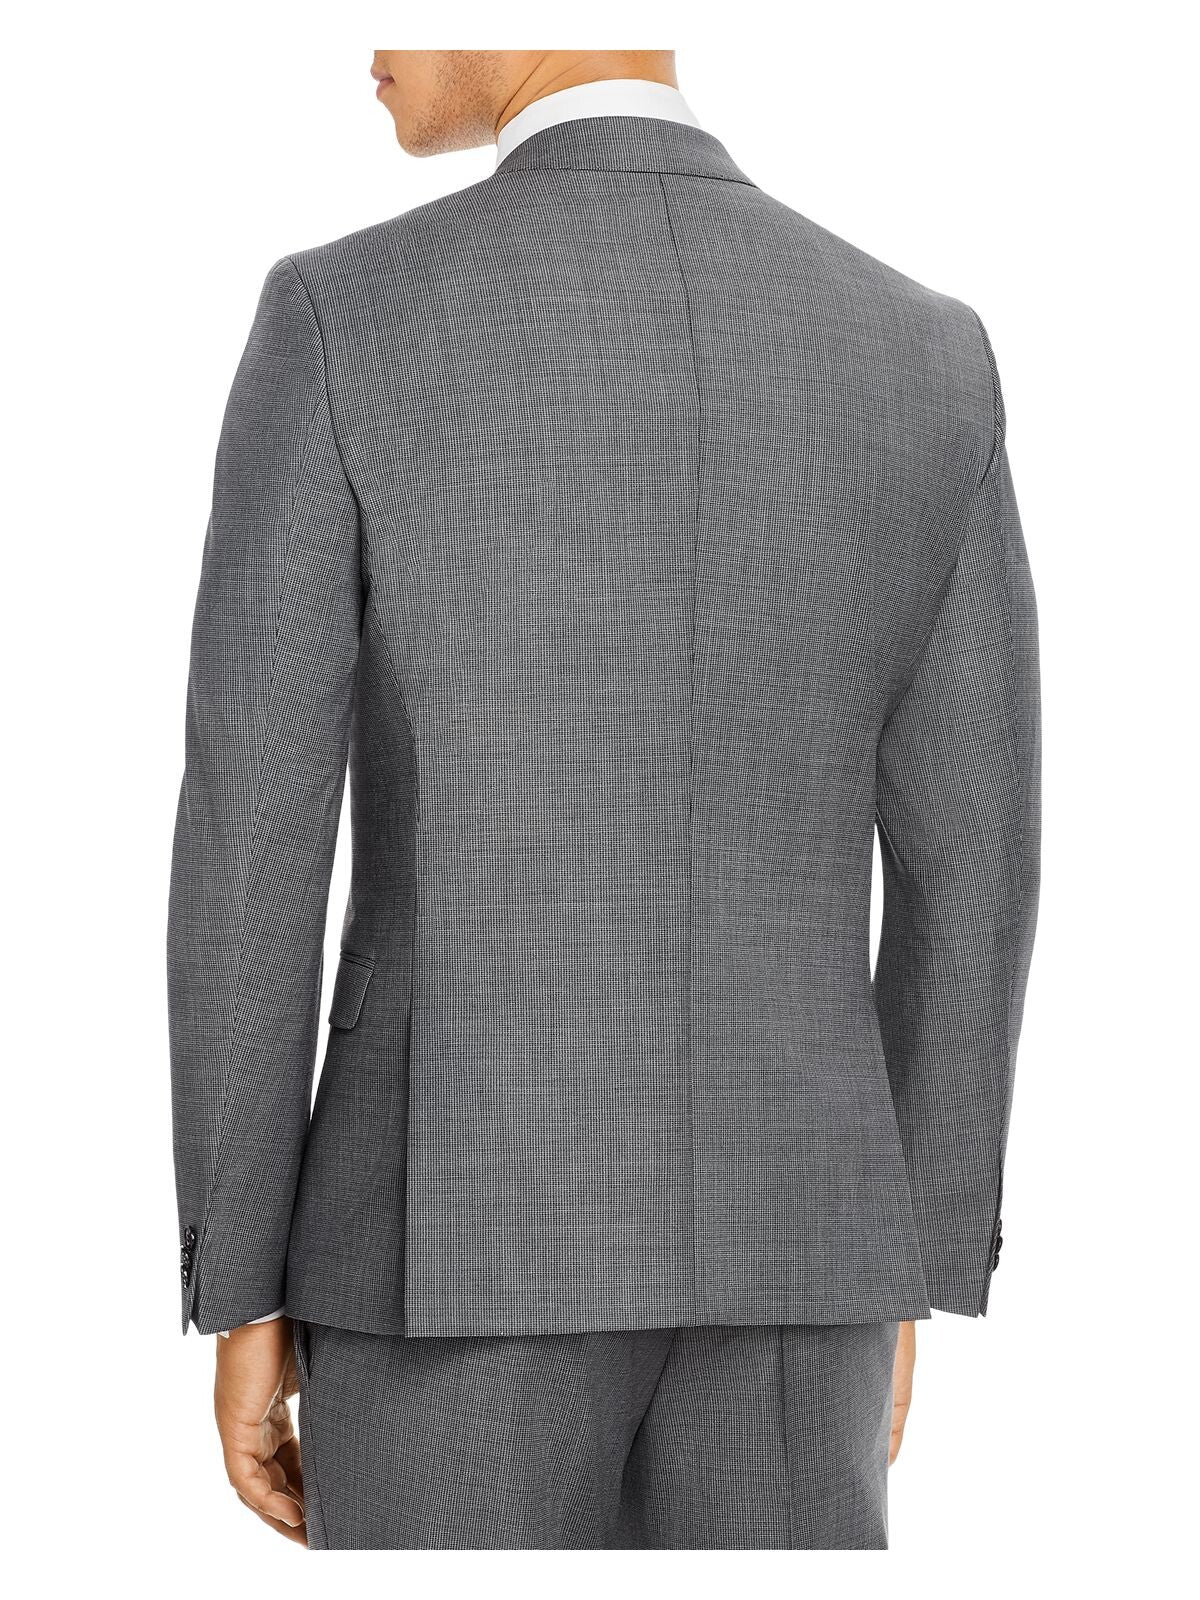 HUGO BOSS Mens Gray Single Breasted, Stretch, Extra Slim Fit Suit Separate Blazer Jacket 38S